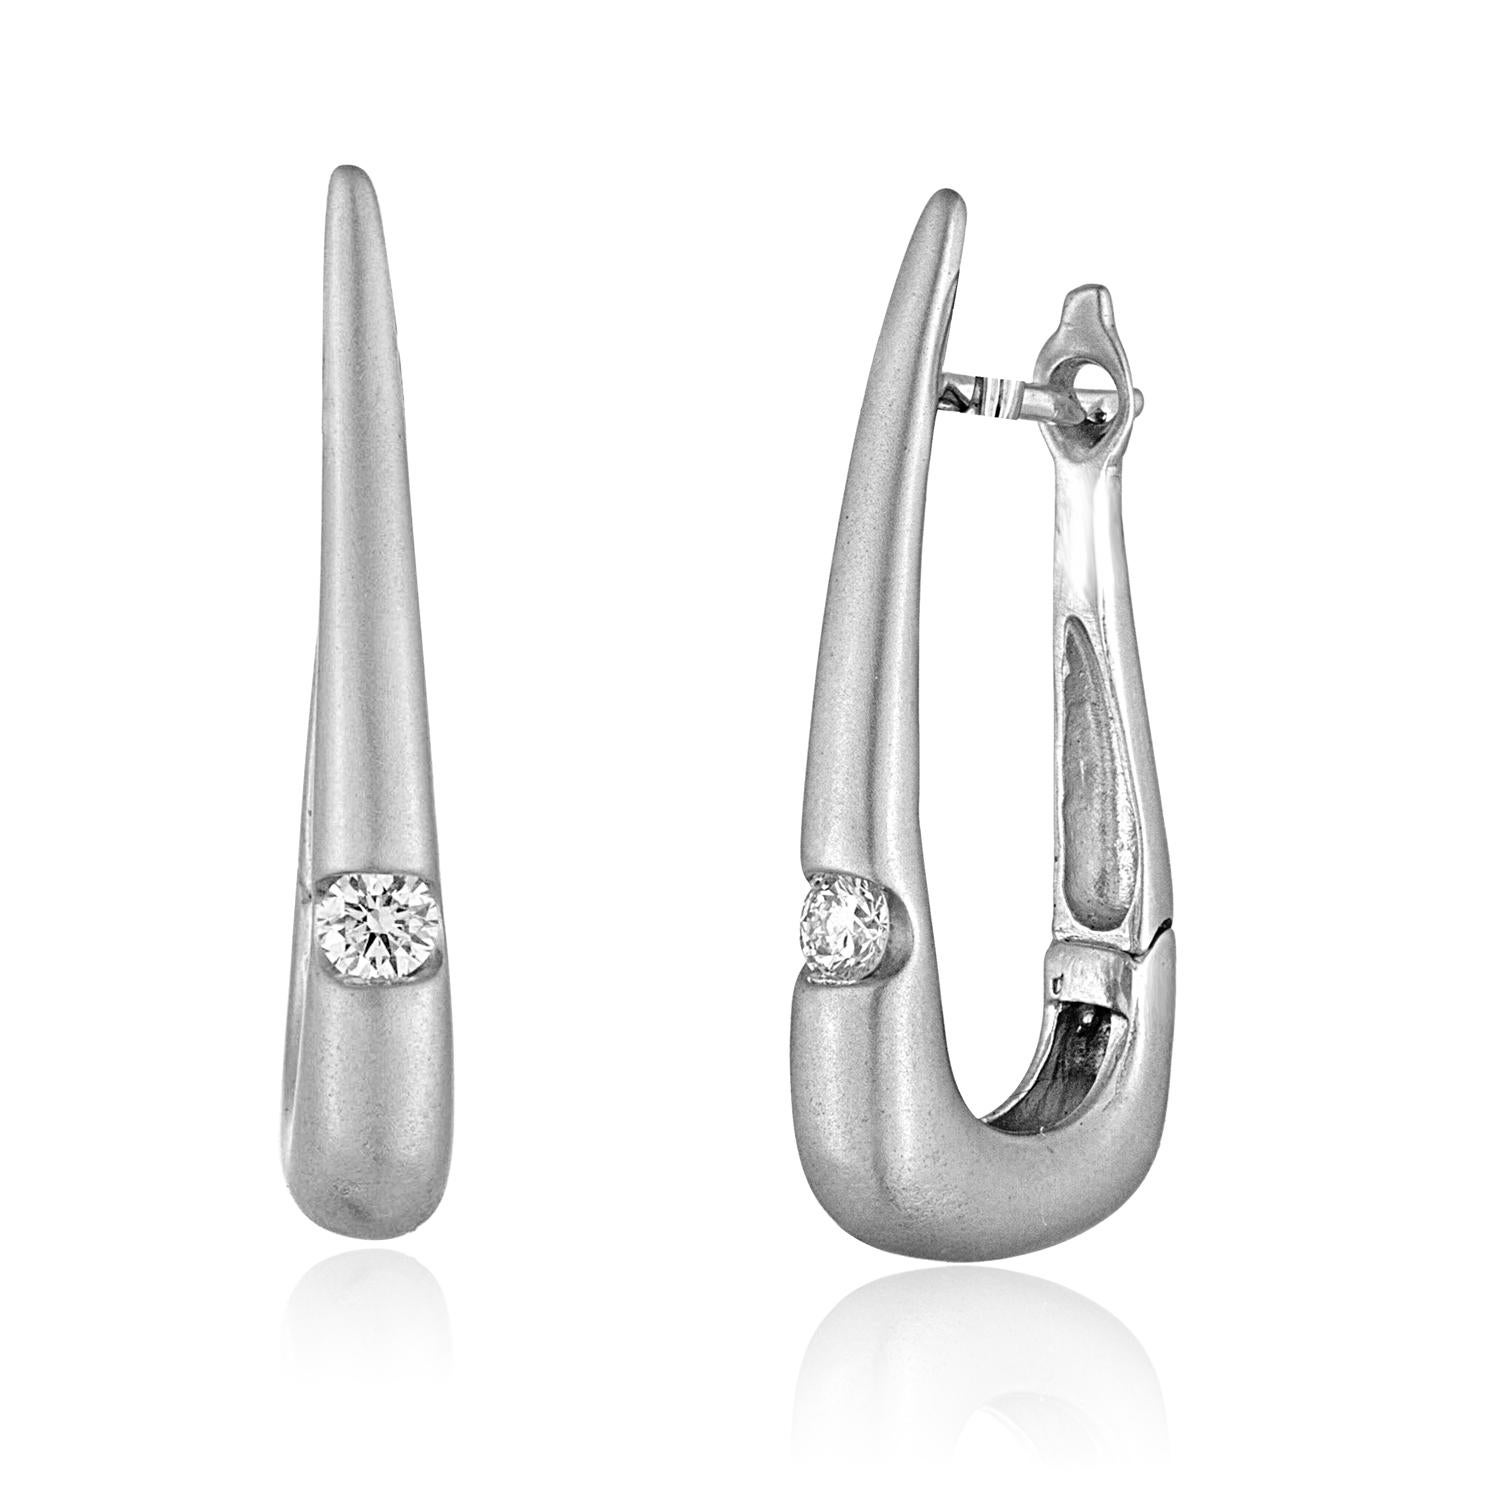 Beautiful Italian Earrings
The back is stamped ITALY 750.
The earrings are 18K Satin Finish White Gold.
There 0.30Ct Diamonds E/F VS/SI
The earrings measure 1.25